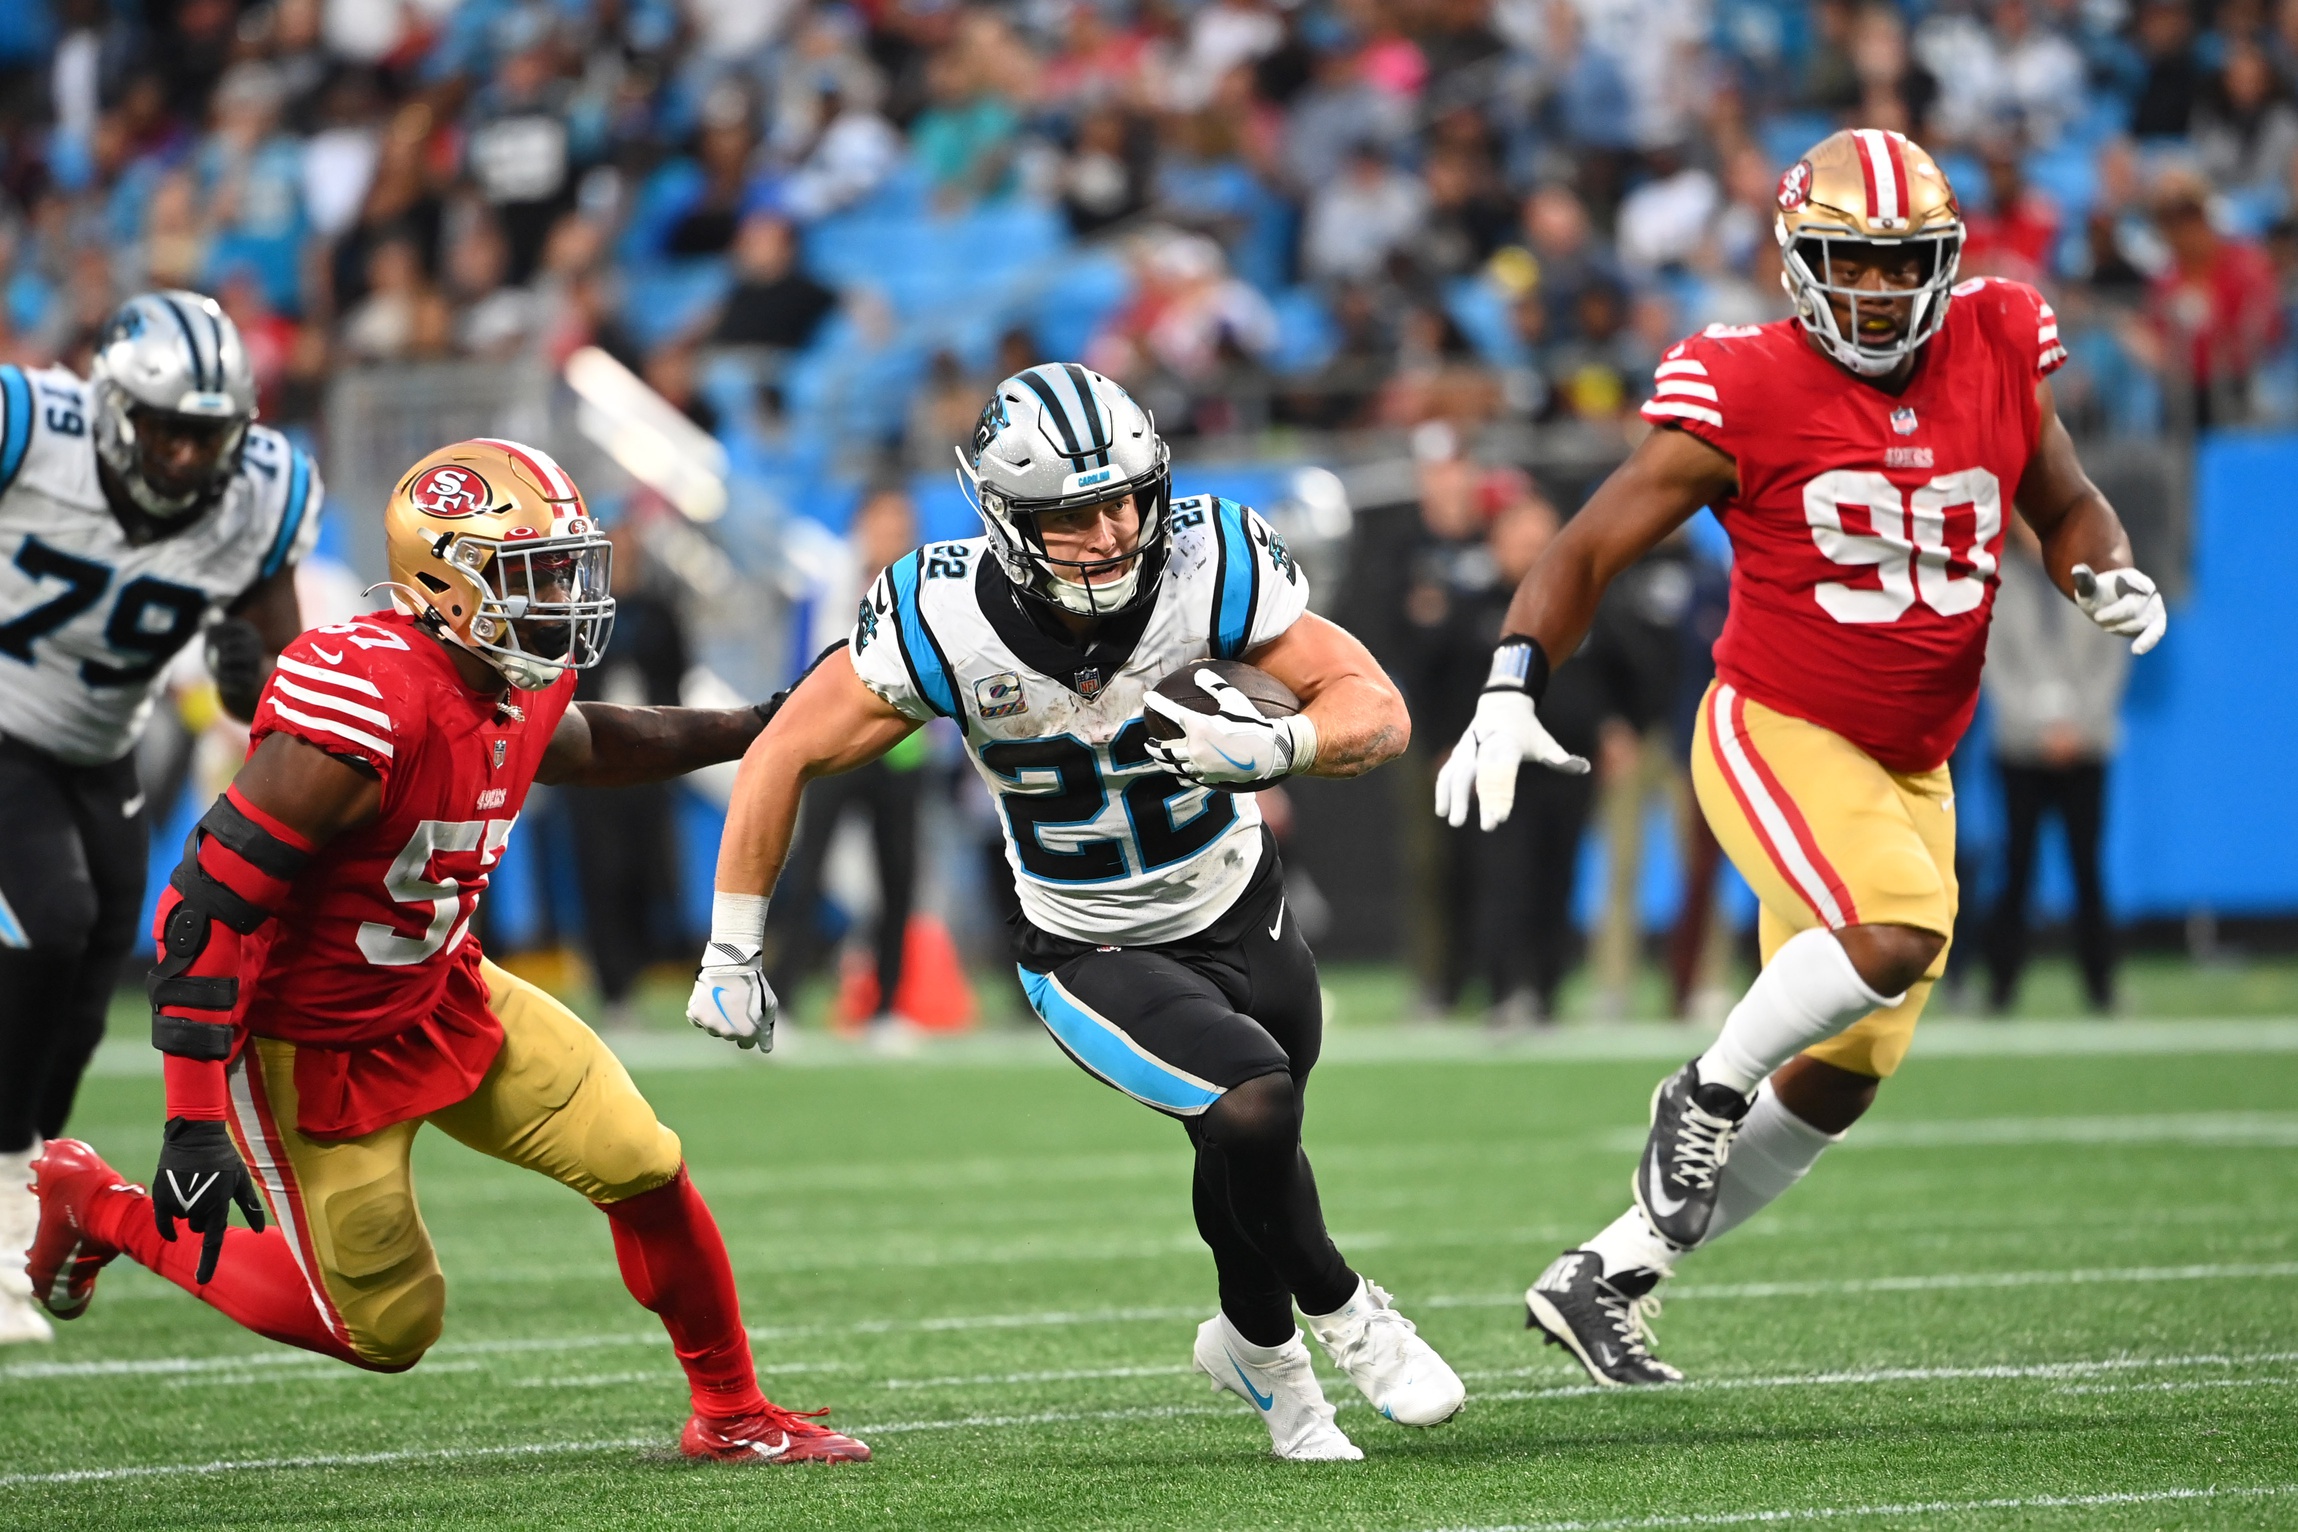 Kyle Shanahan on what to expect from Christian McCaffrey in second